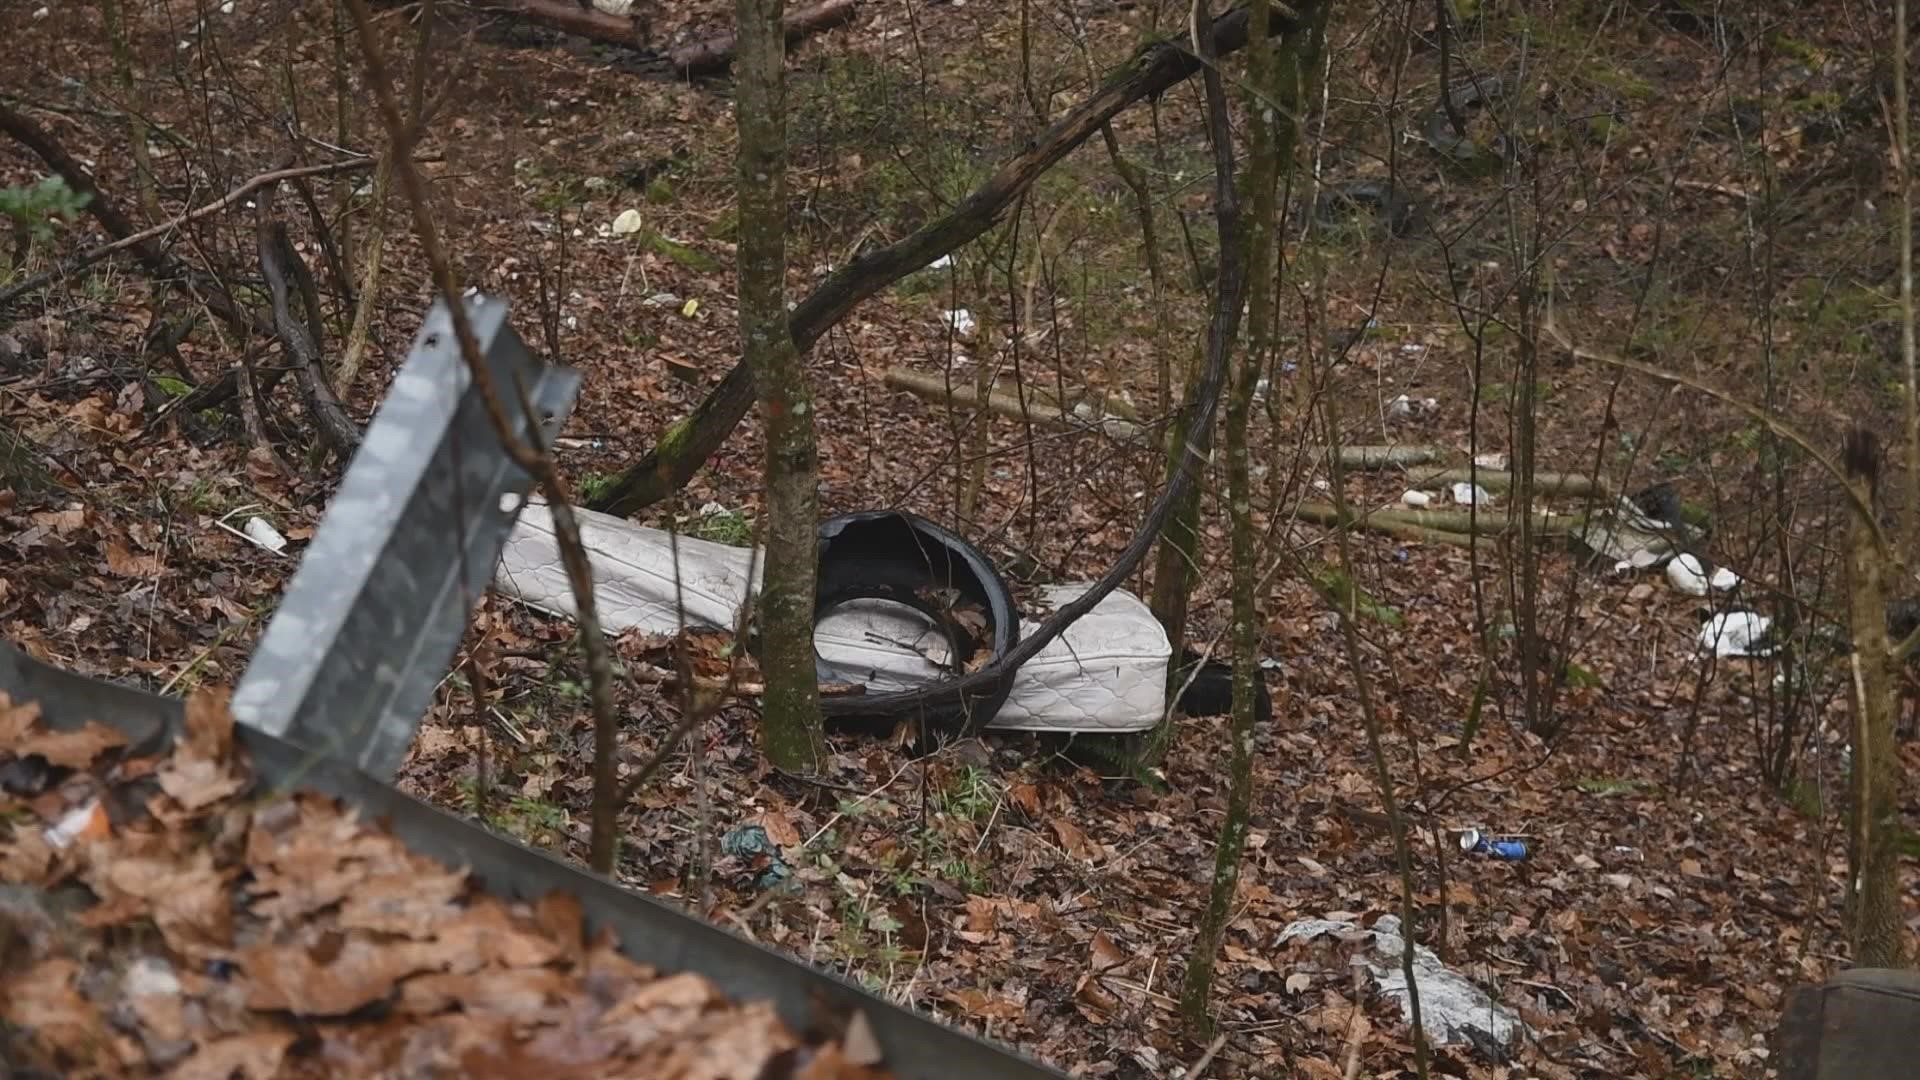 The county environmental officer investigates dumping sites and tracks large piles of litter back to their owners.